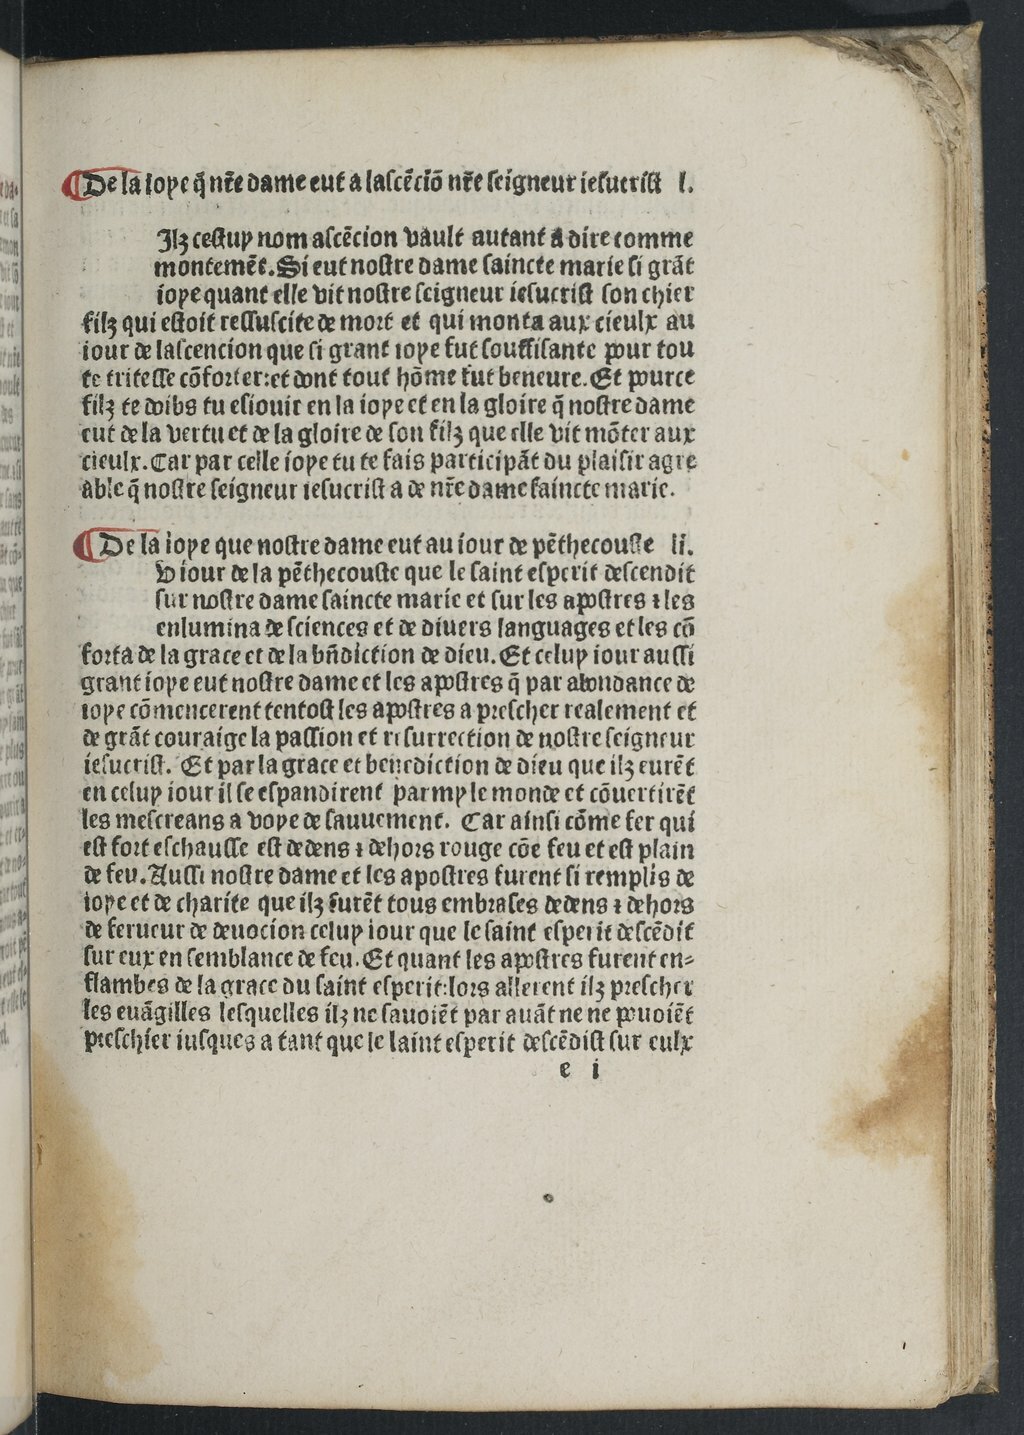 1482 [Antoine Caillaut] Trésor des humains BnF_Page_067.jpg